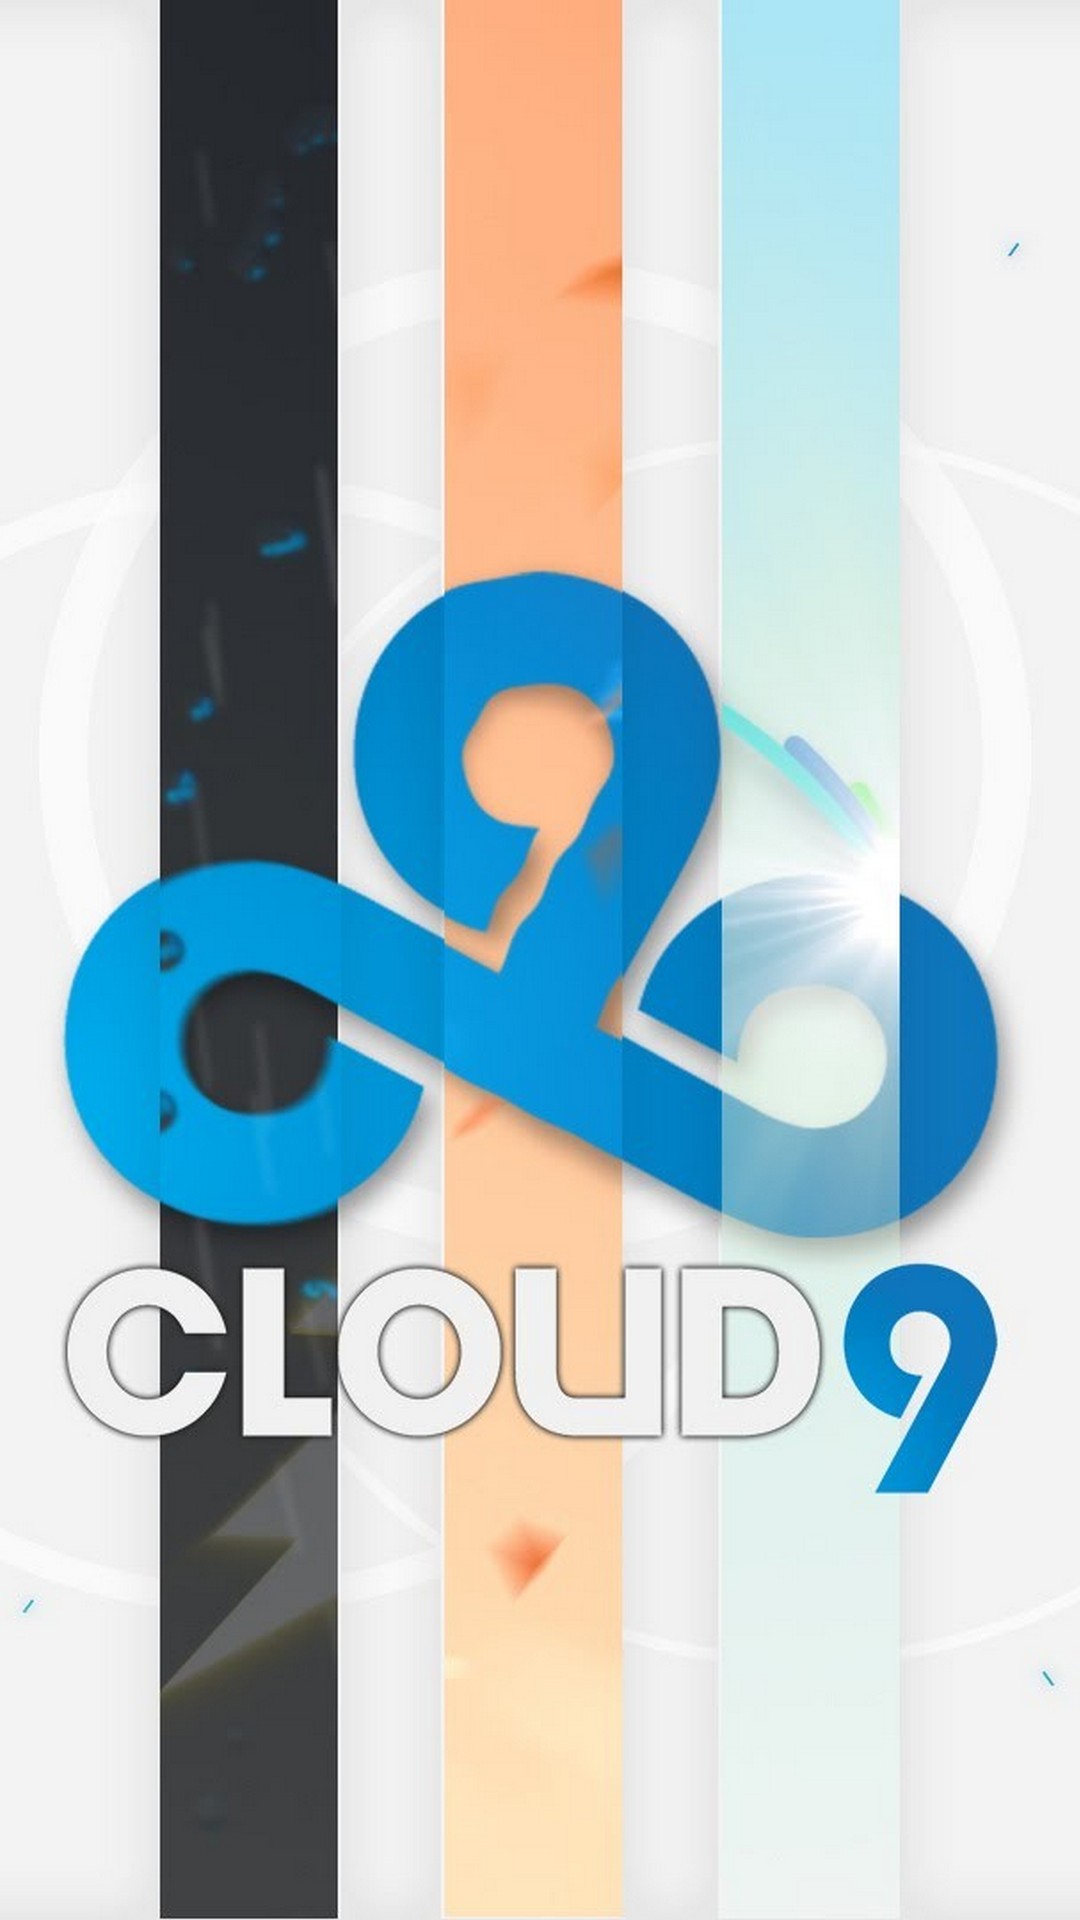 Wallpapers Cloud 9 resolution 1080x1920